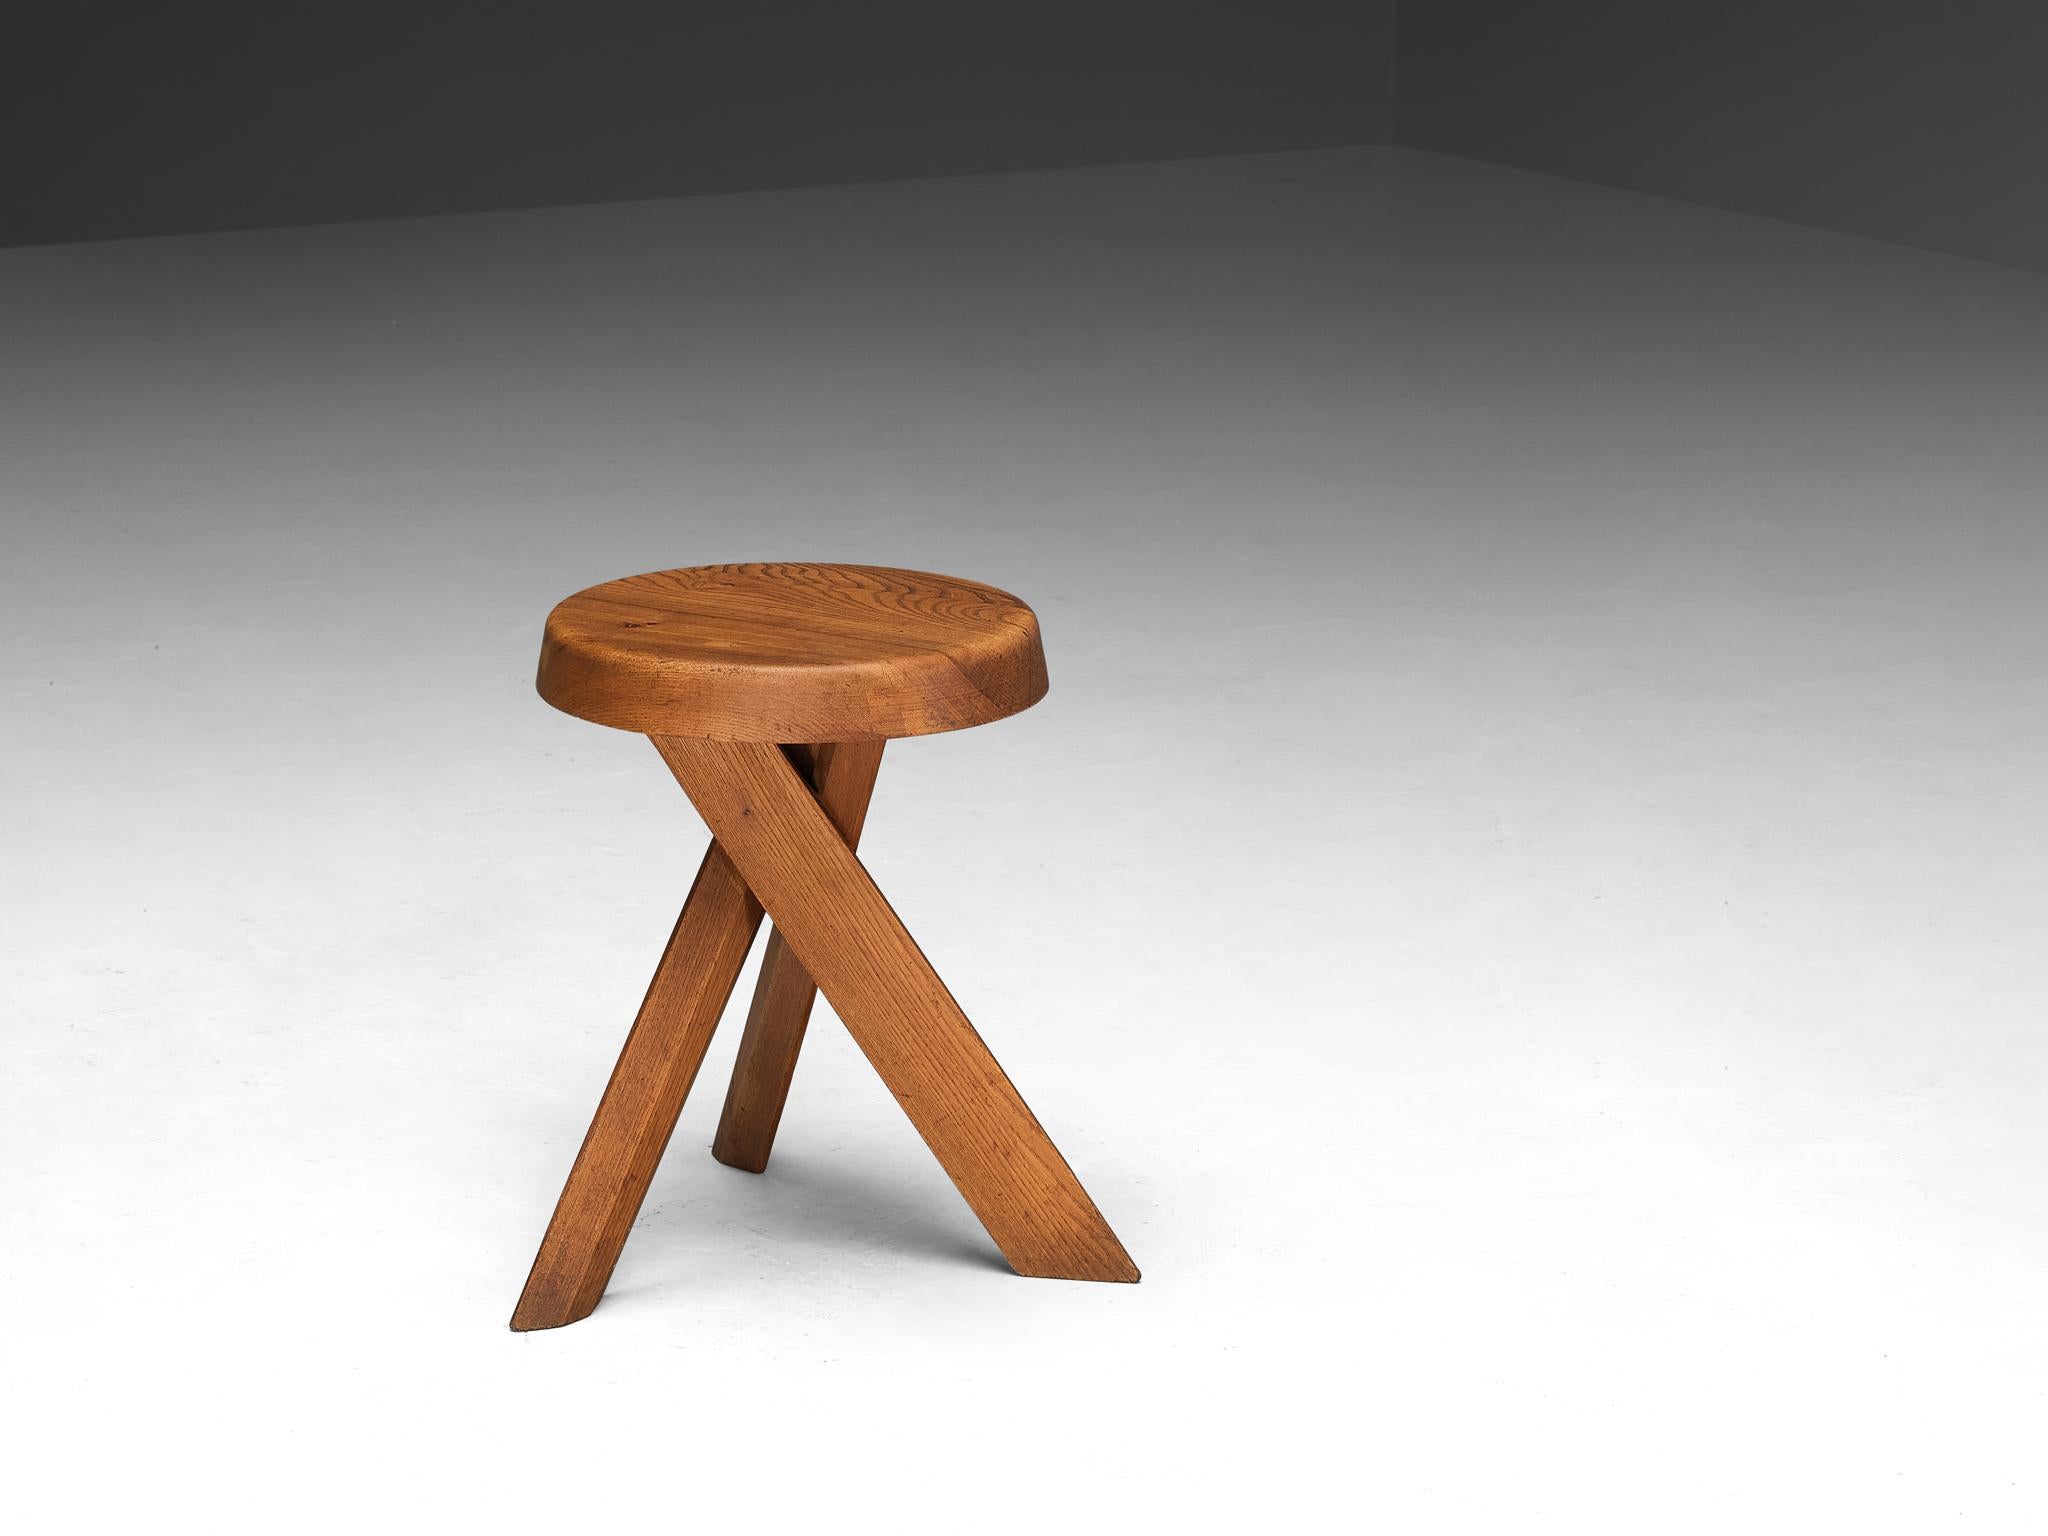 Pierre Chapo, stool, model 'S31A', solid elm, France, circa 1974

This S31A stool is one of the early editions designed by Pierre Chapo, known for his hallmark use of solid elmwood and a commitment to pure and clean design and construction